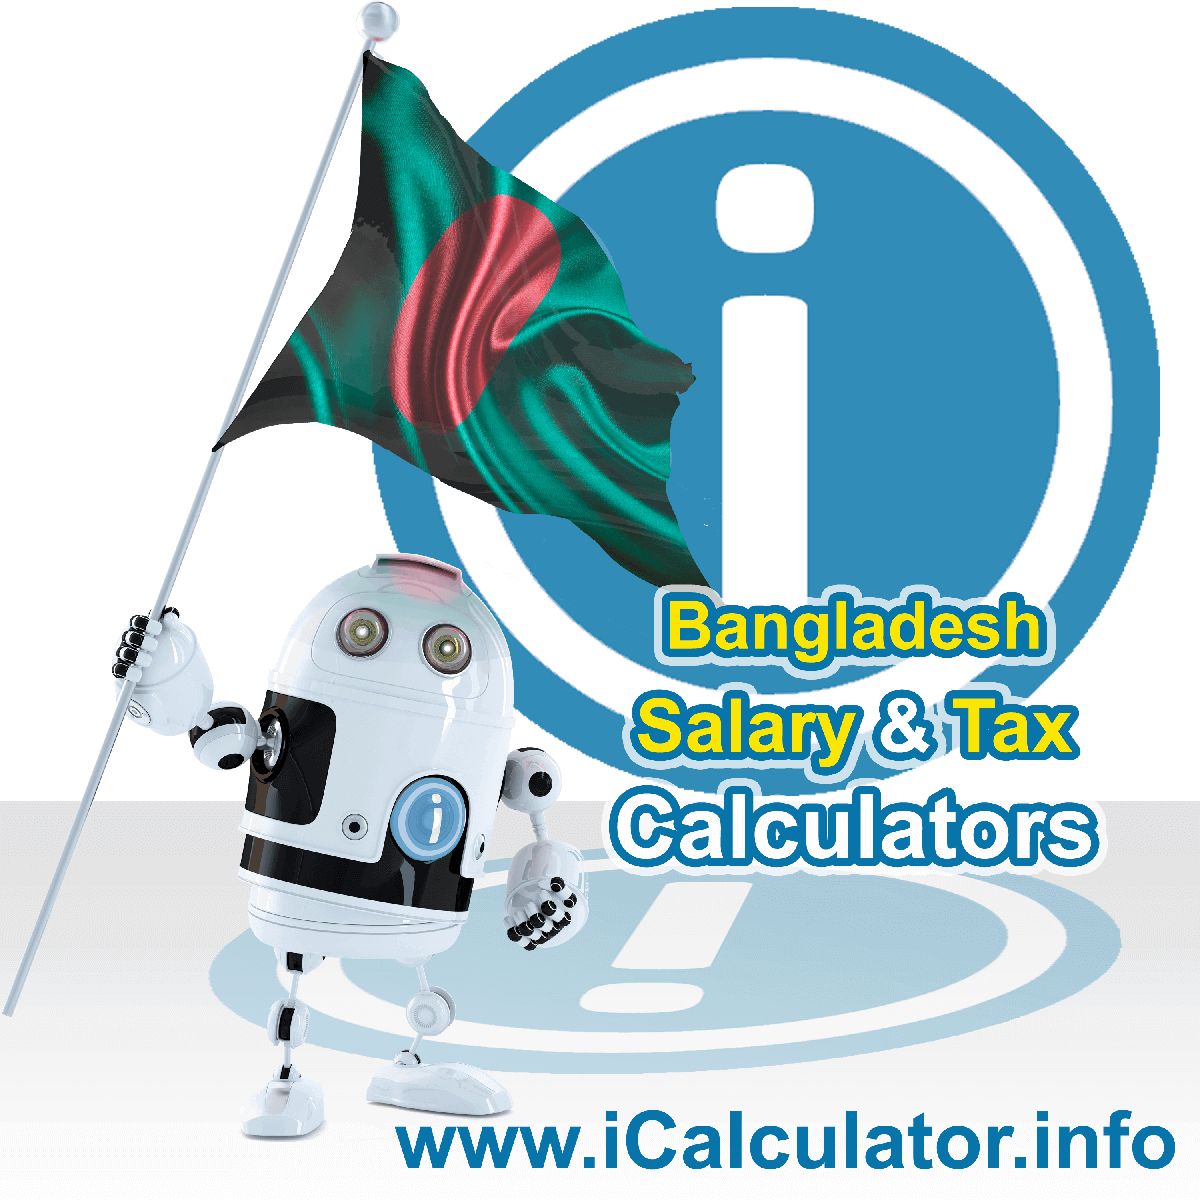 Bangladesh Tax Calculator. This image shows the Bangladesh flag and information relating to the tax formula for the Bangladesh Salary Calculator